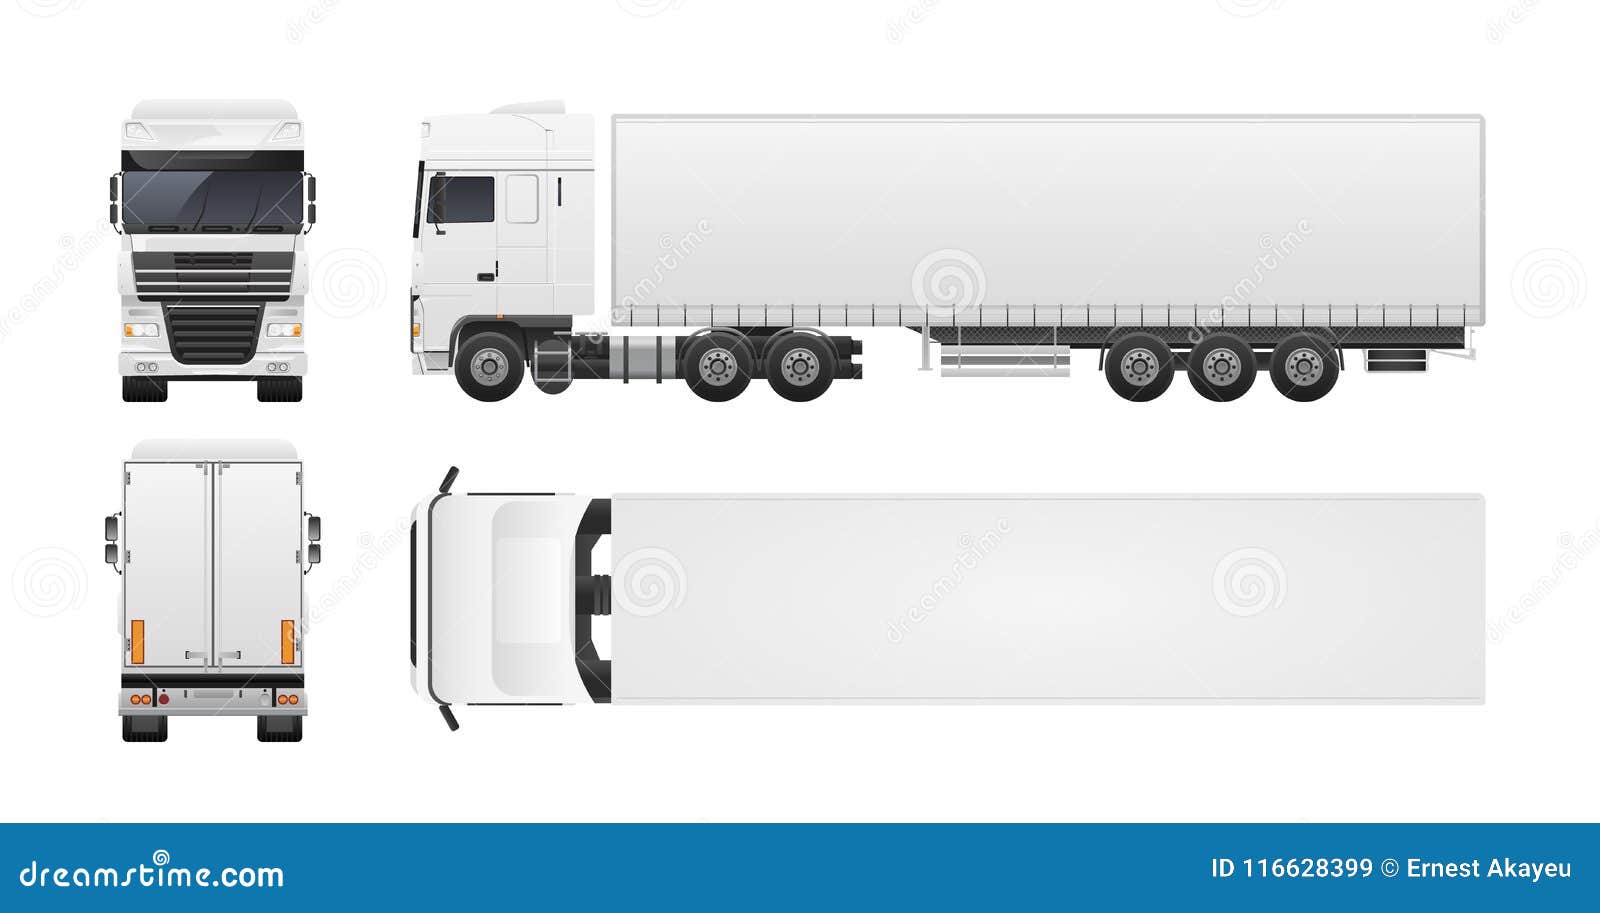 modern truck or lorry  on white background. front, back, top and side views. commercial road vehicle, automobile